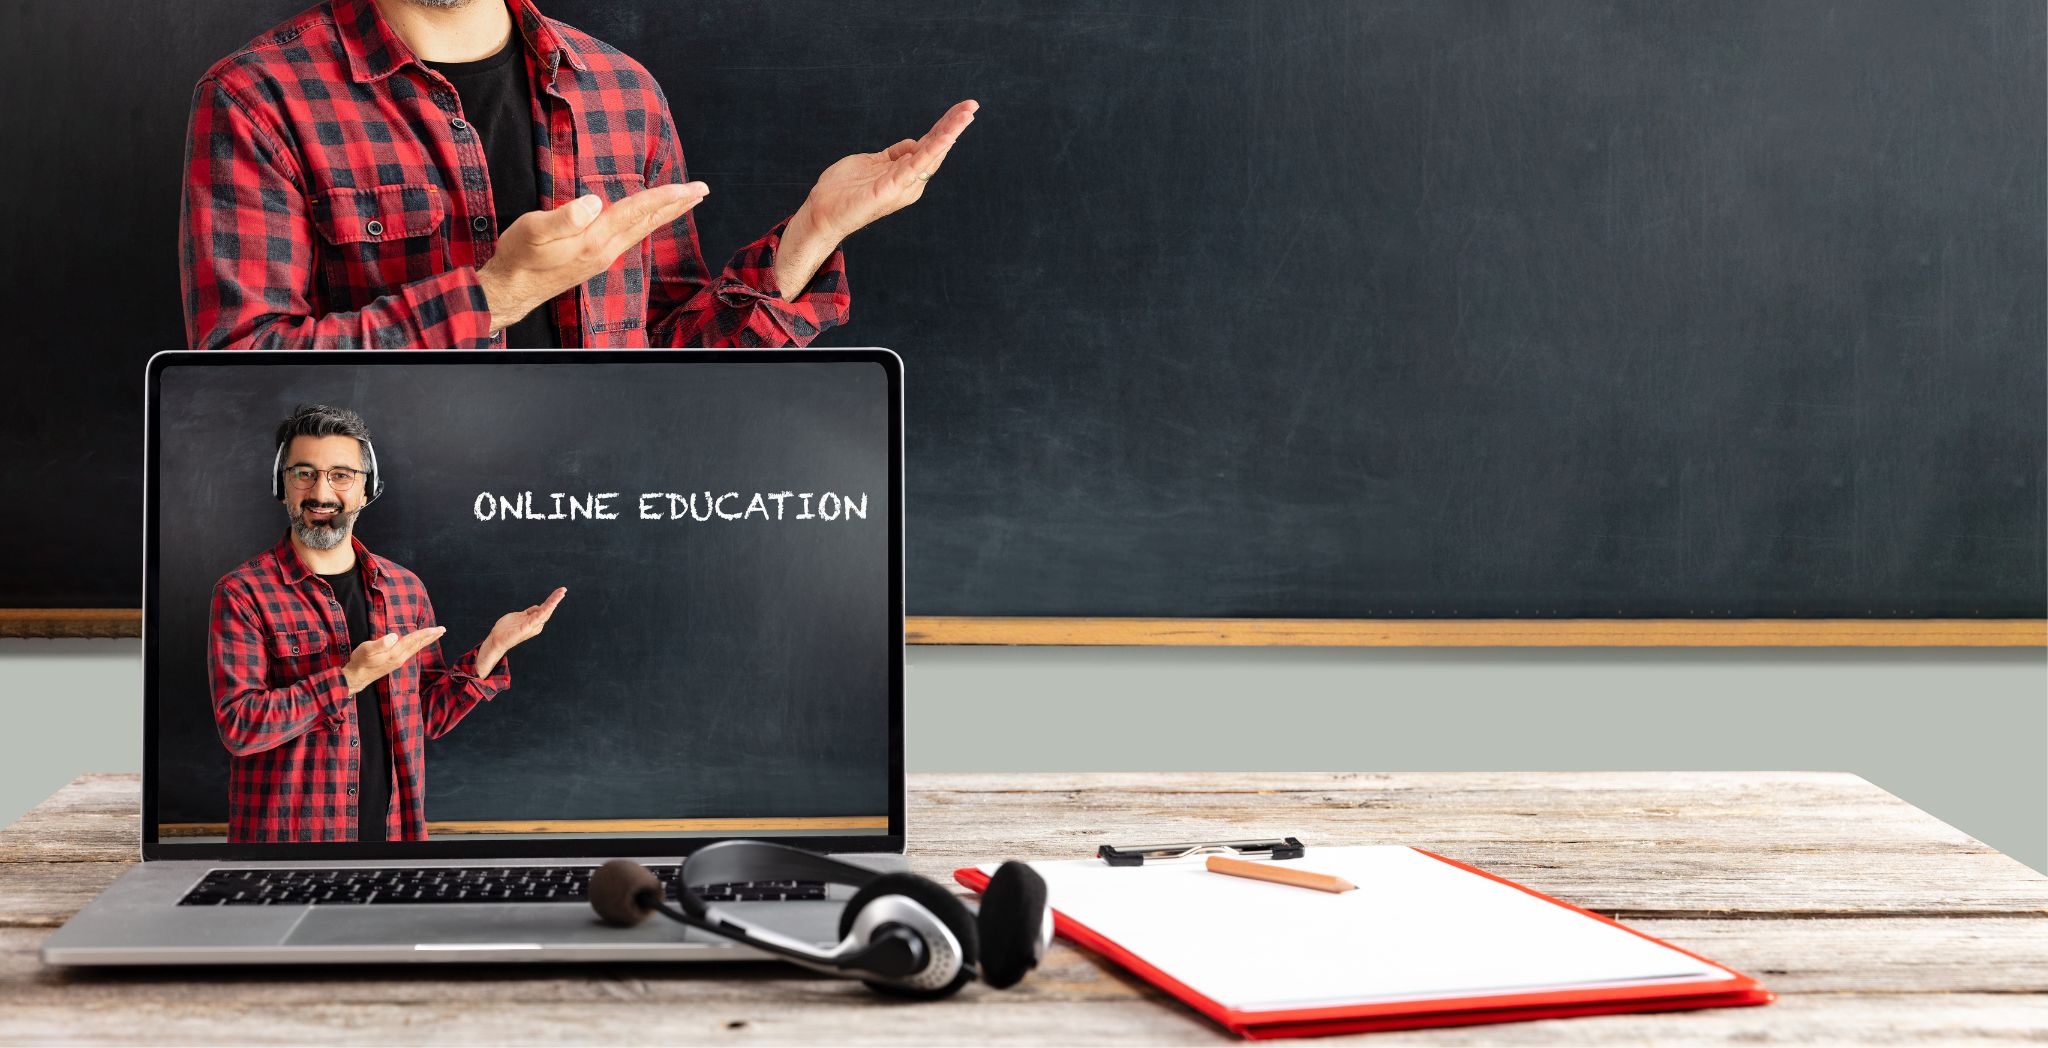 online learning australia, benefits of education, reasons why education is important, benefits of education for students, why is education important, importance of education